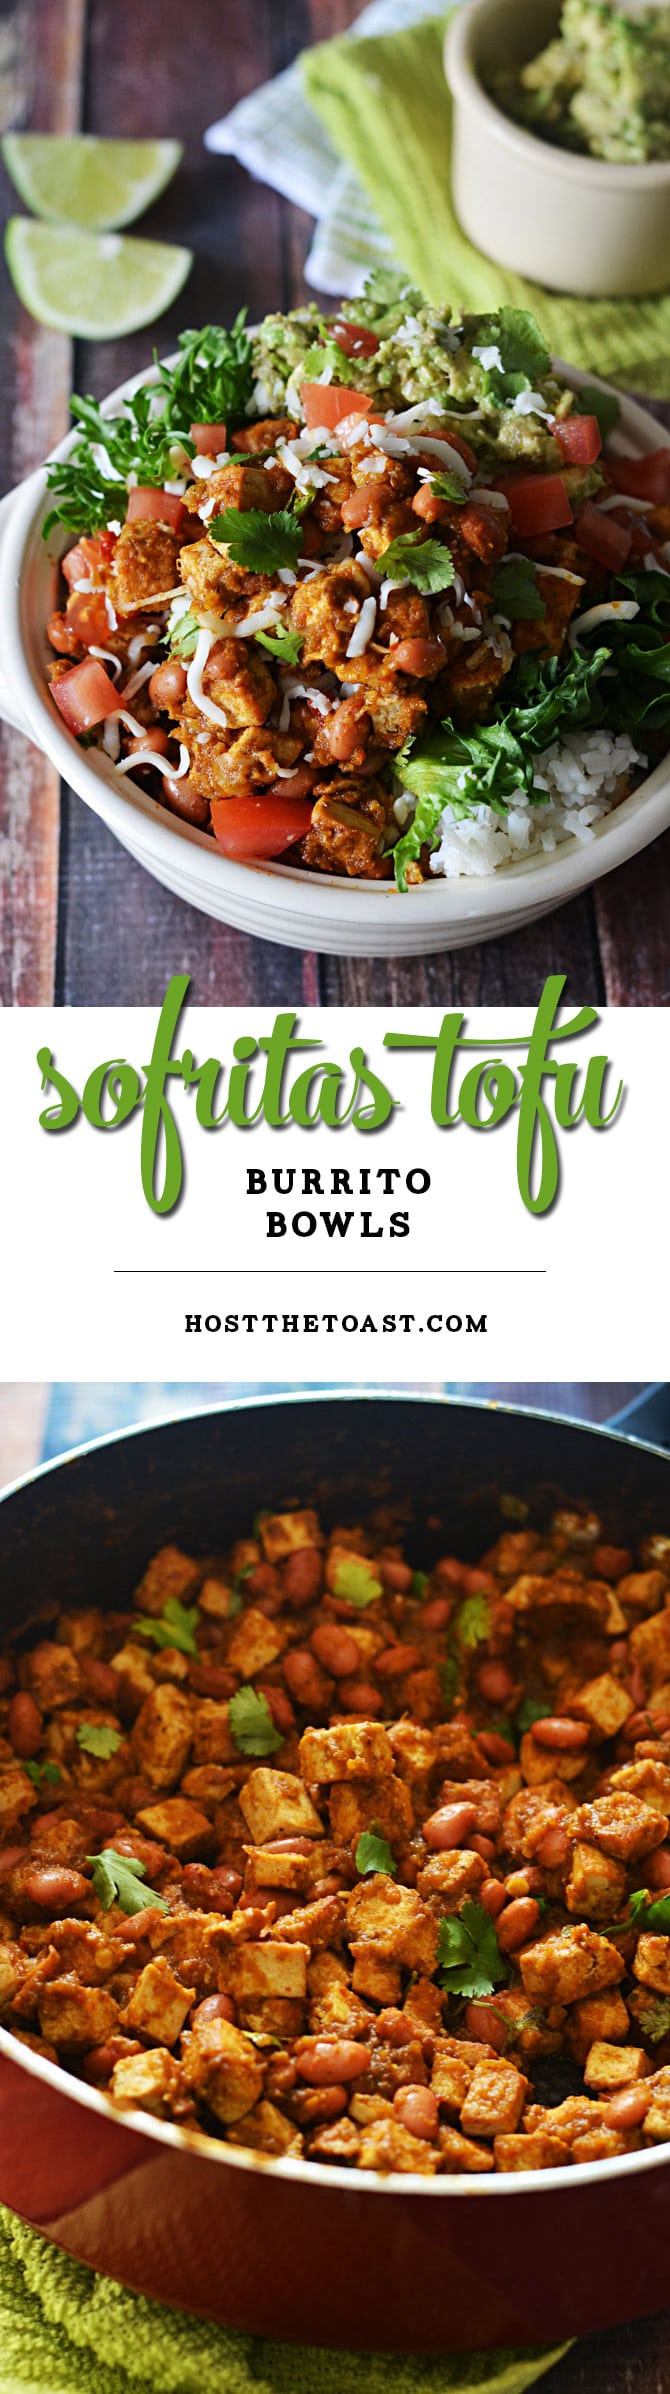 Sofritas #Tofu Burrito Bowls. Even better than the ones at #Chipotle, and easy/cheap to make at home! | hostthetoast.com